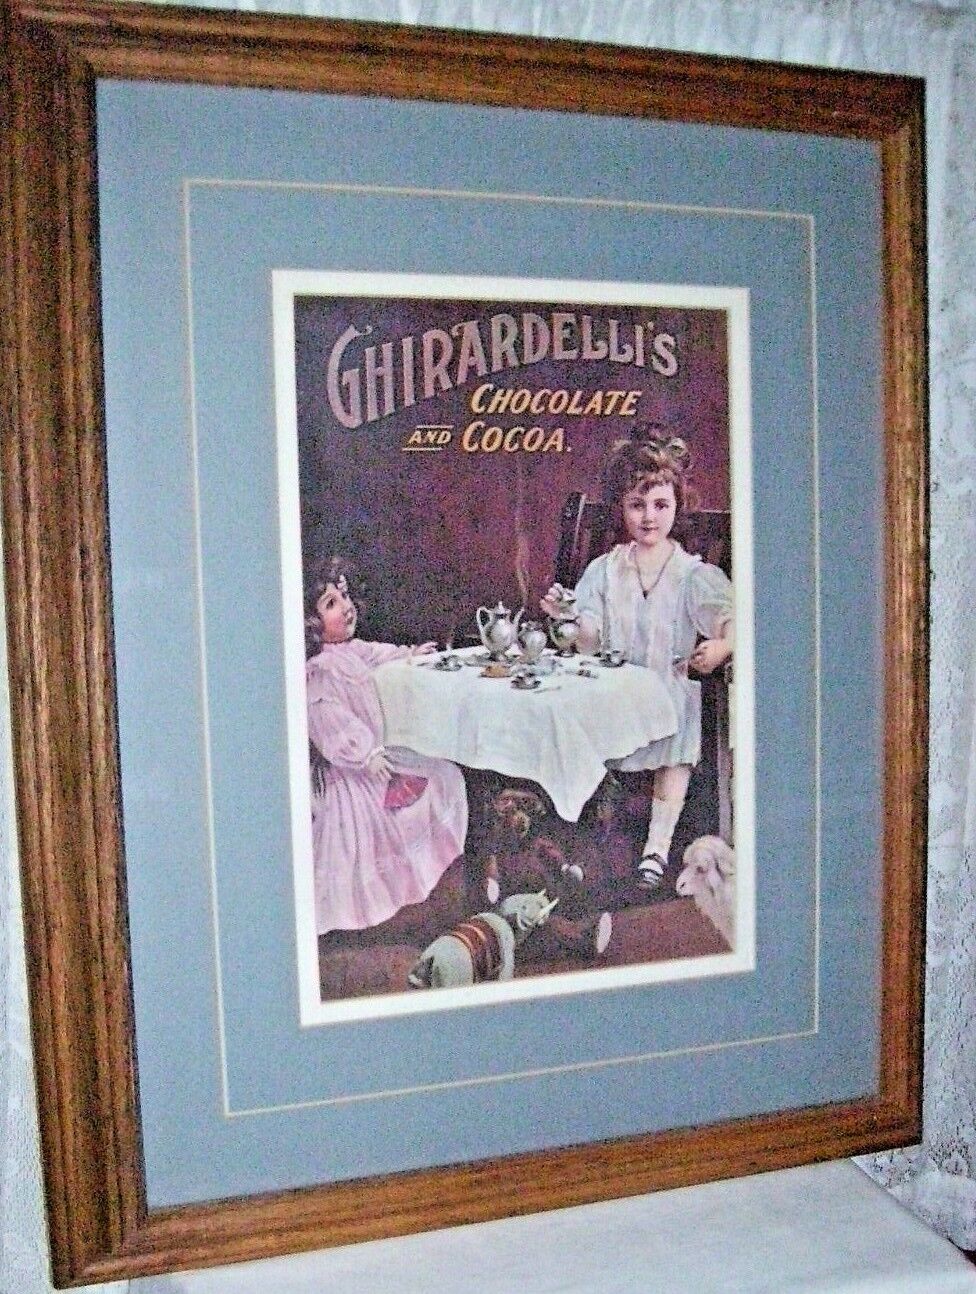 Ghirardelli's Chocolate and Cocoa Large Oak Framed Advertisement